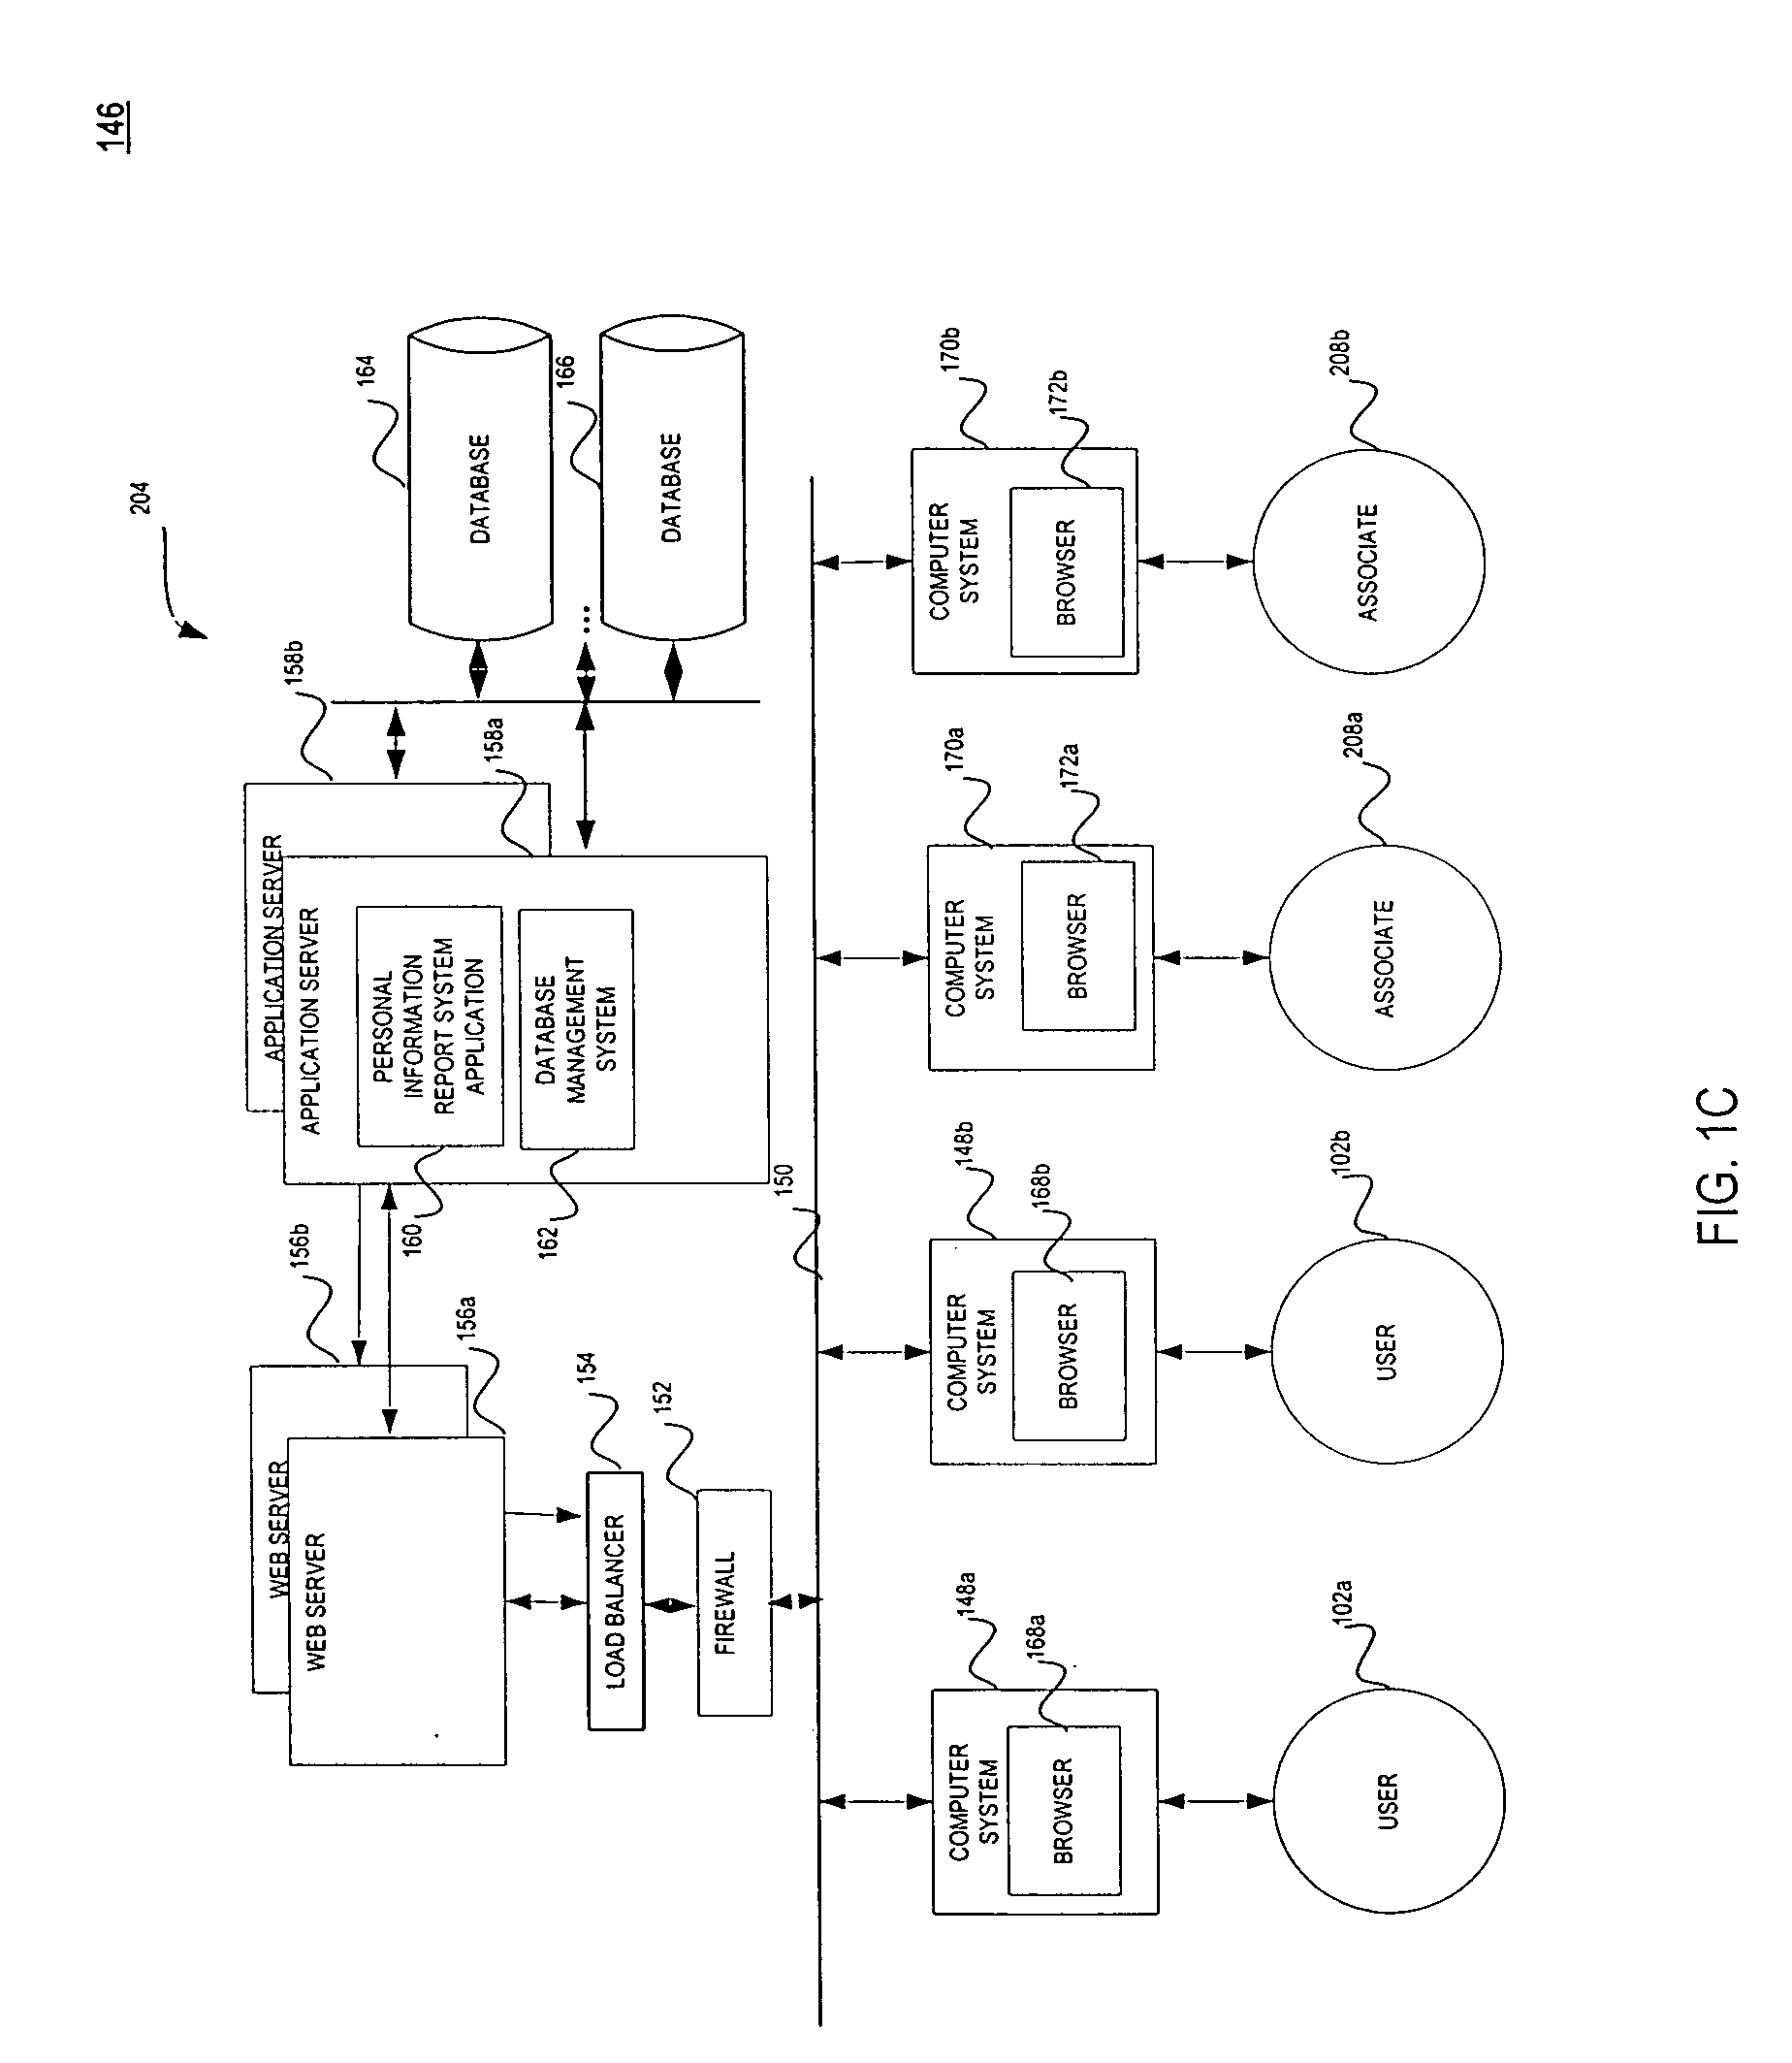 System, method and computer program product for gathering and delivering personalized user information